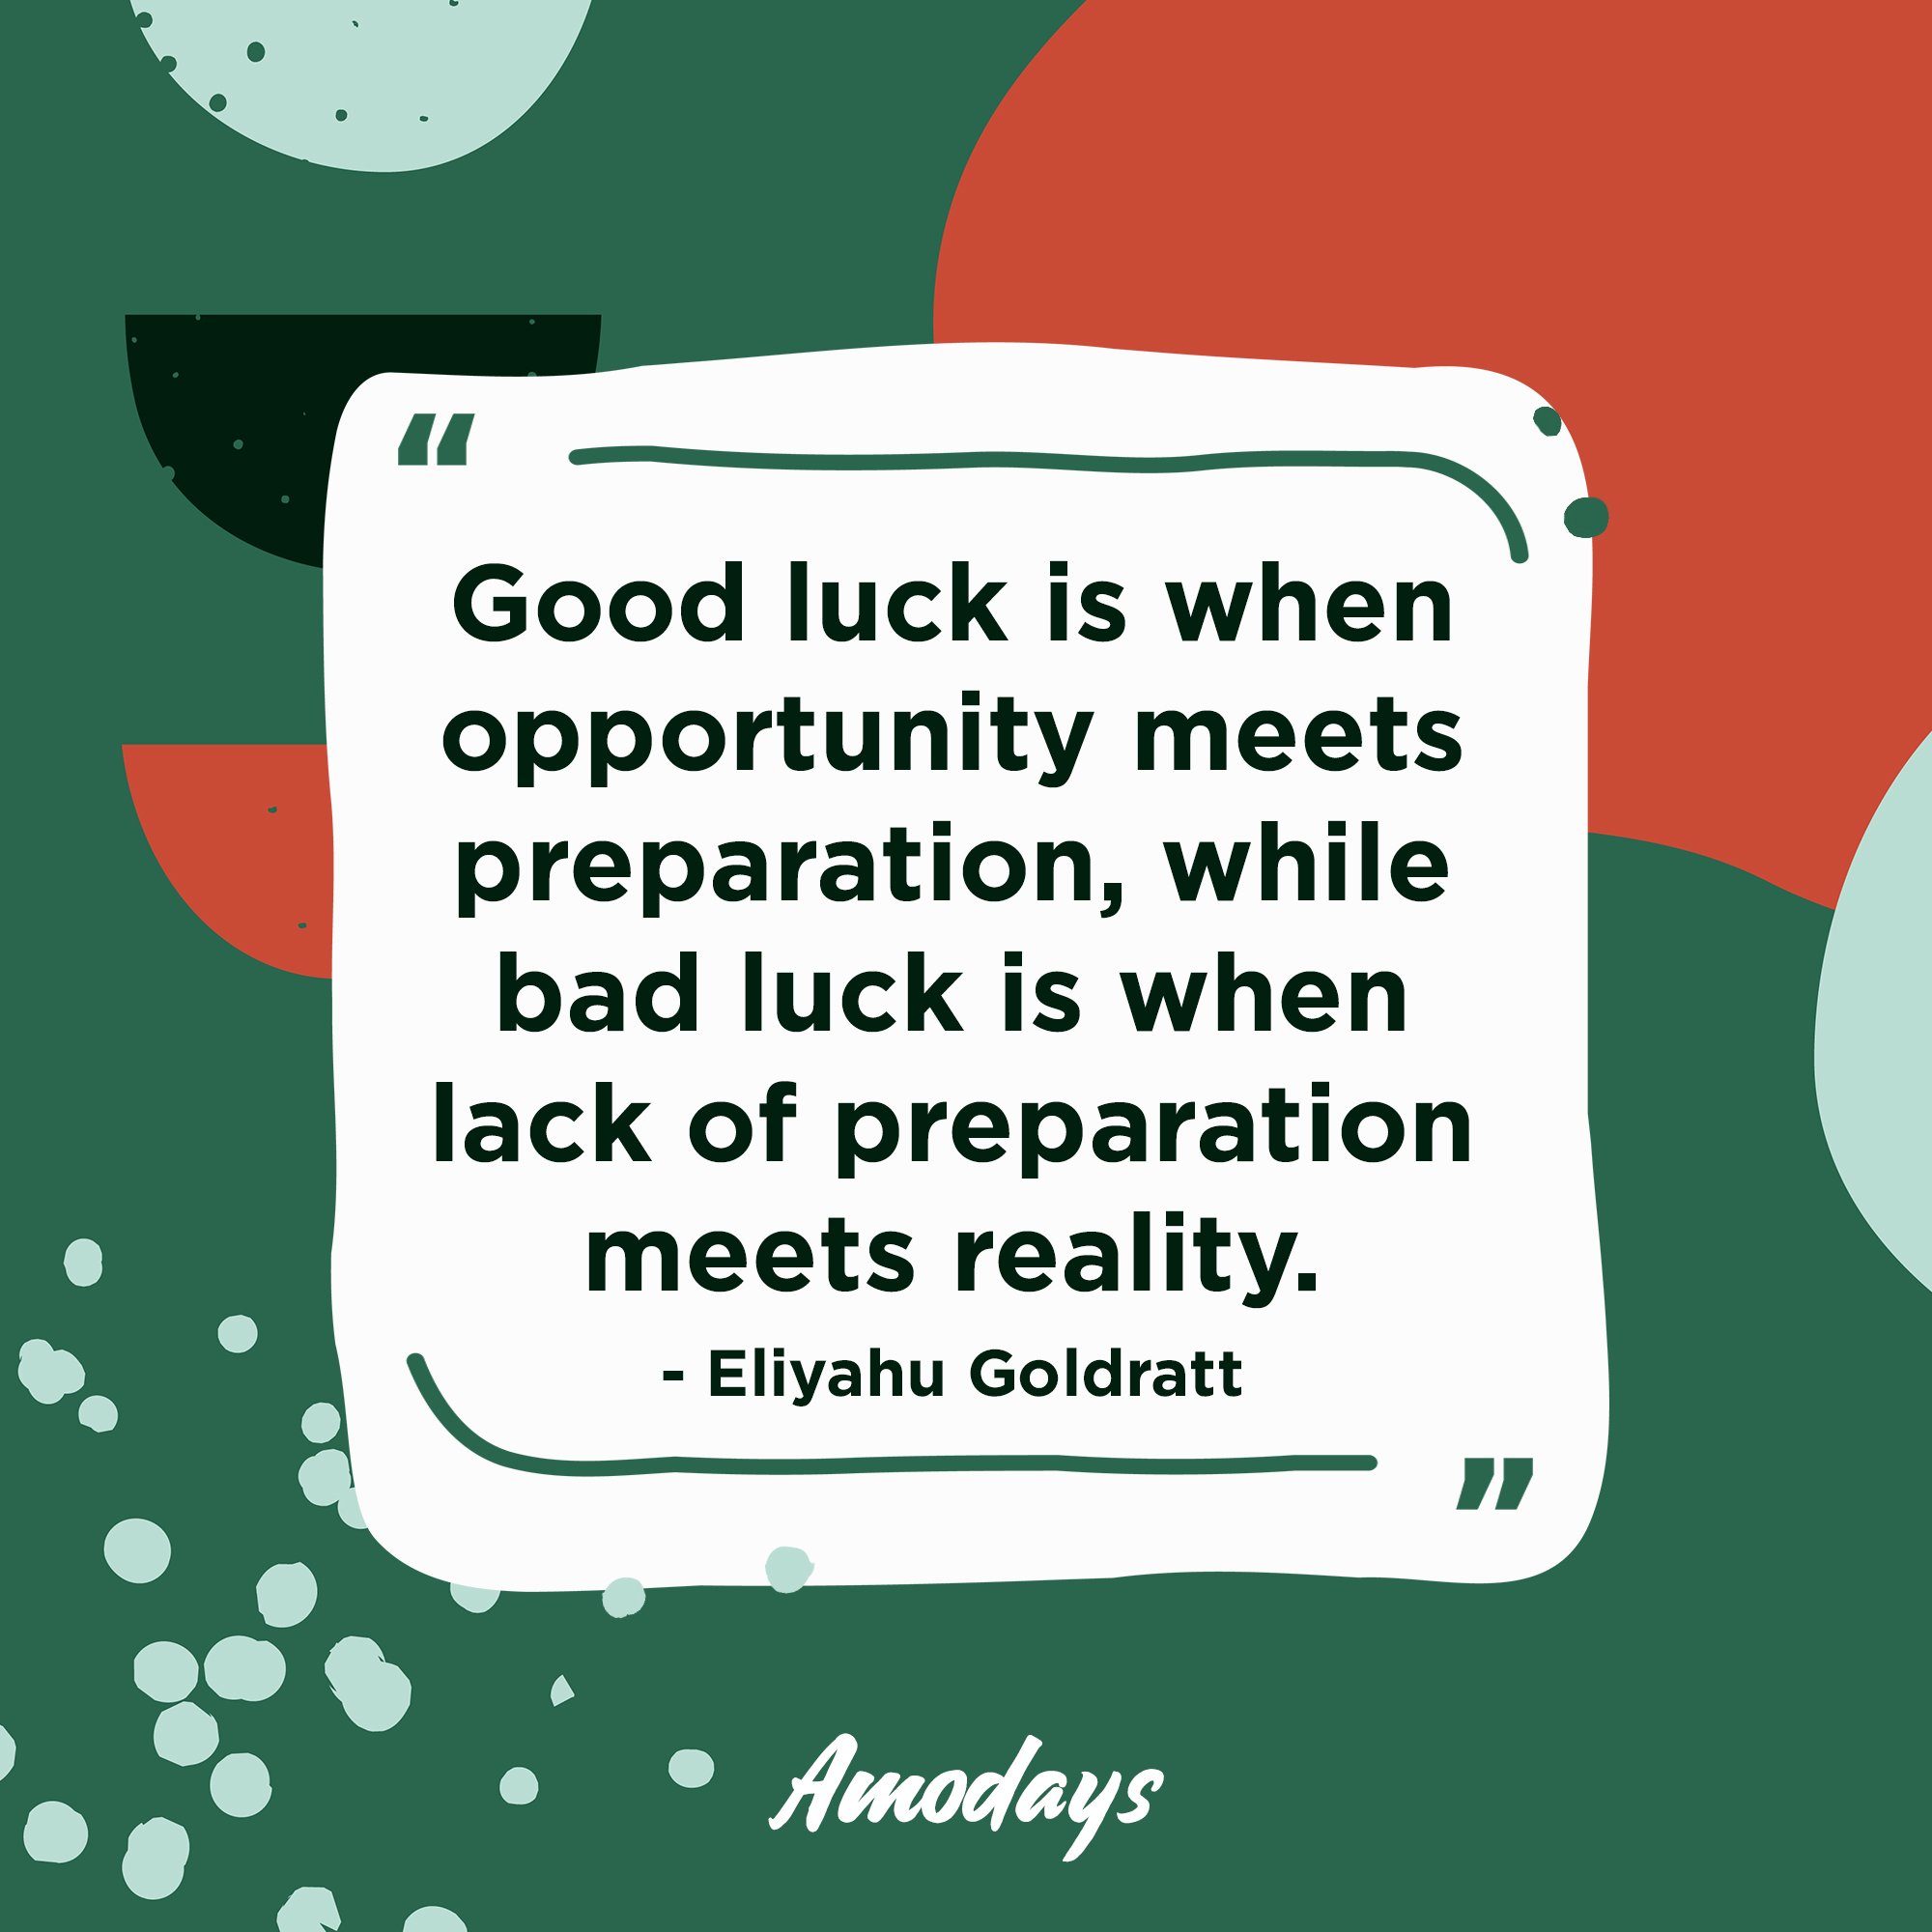 Eliyahu Goldratt's quote: “Good luck is when opportunity meets preparation, while bad luck is when lack of preparation meets reality.” | Image: AmoDays